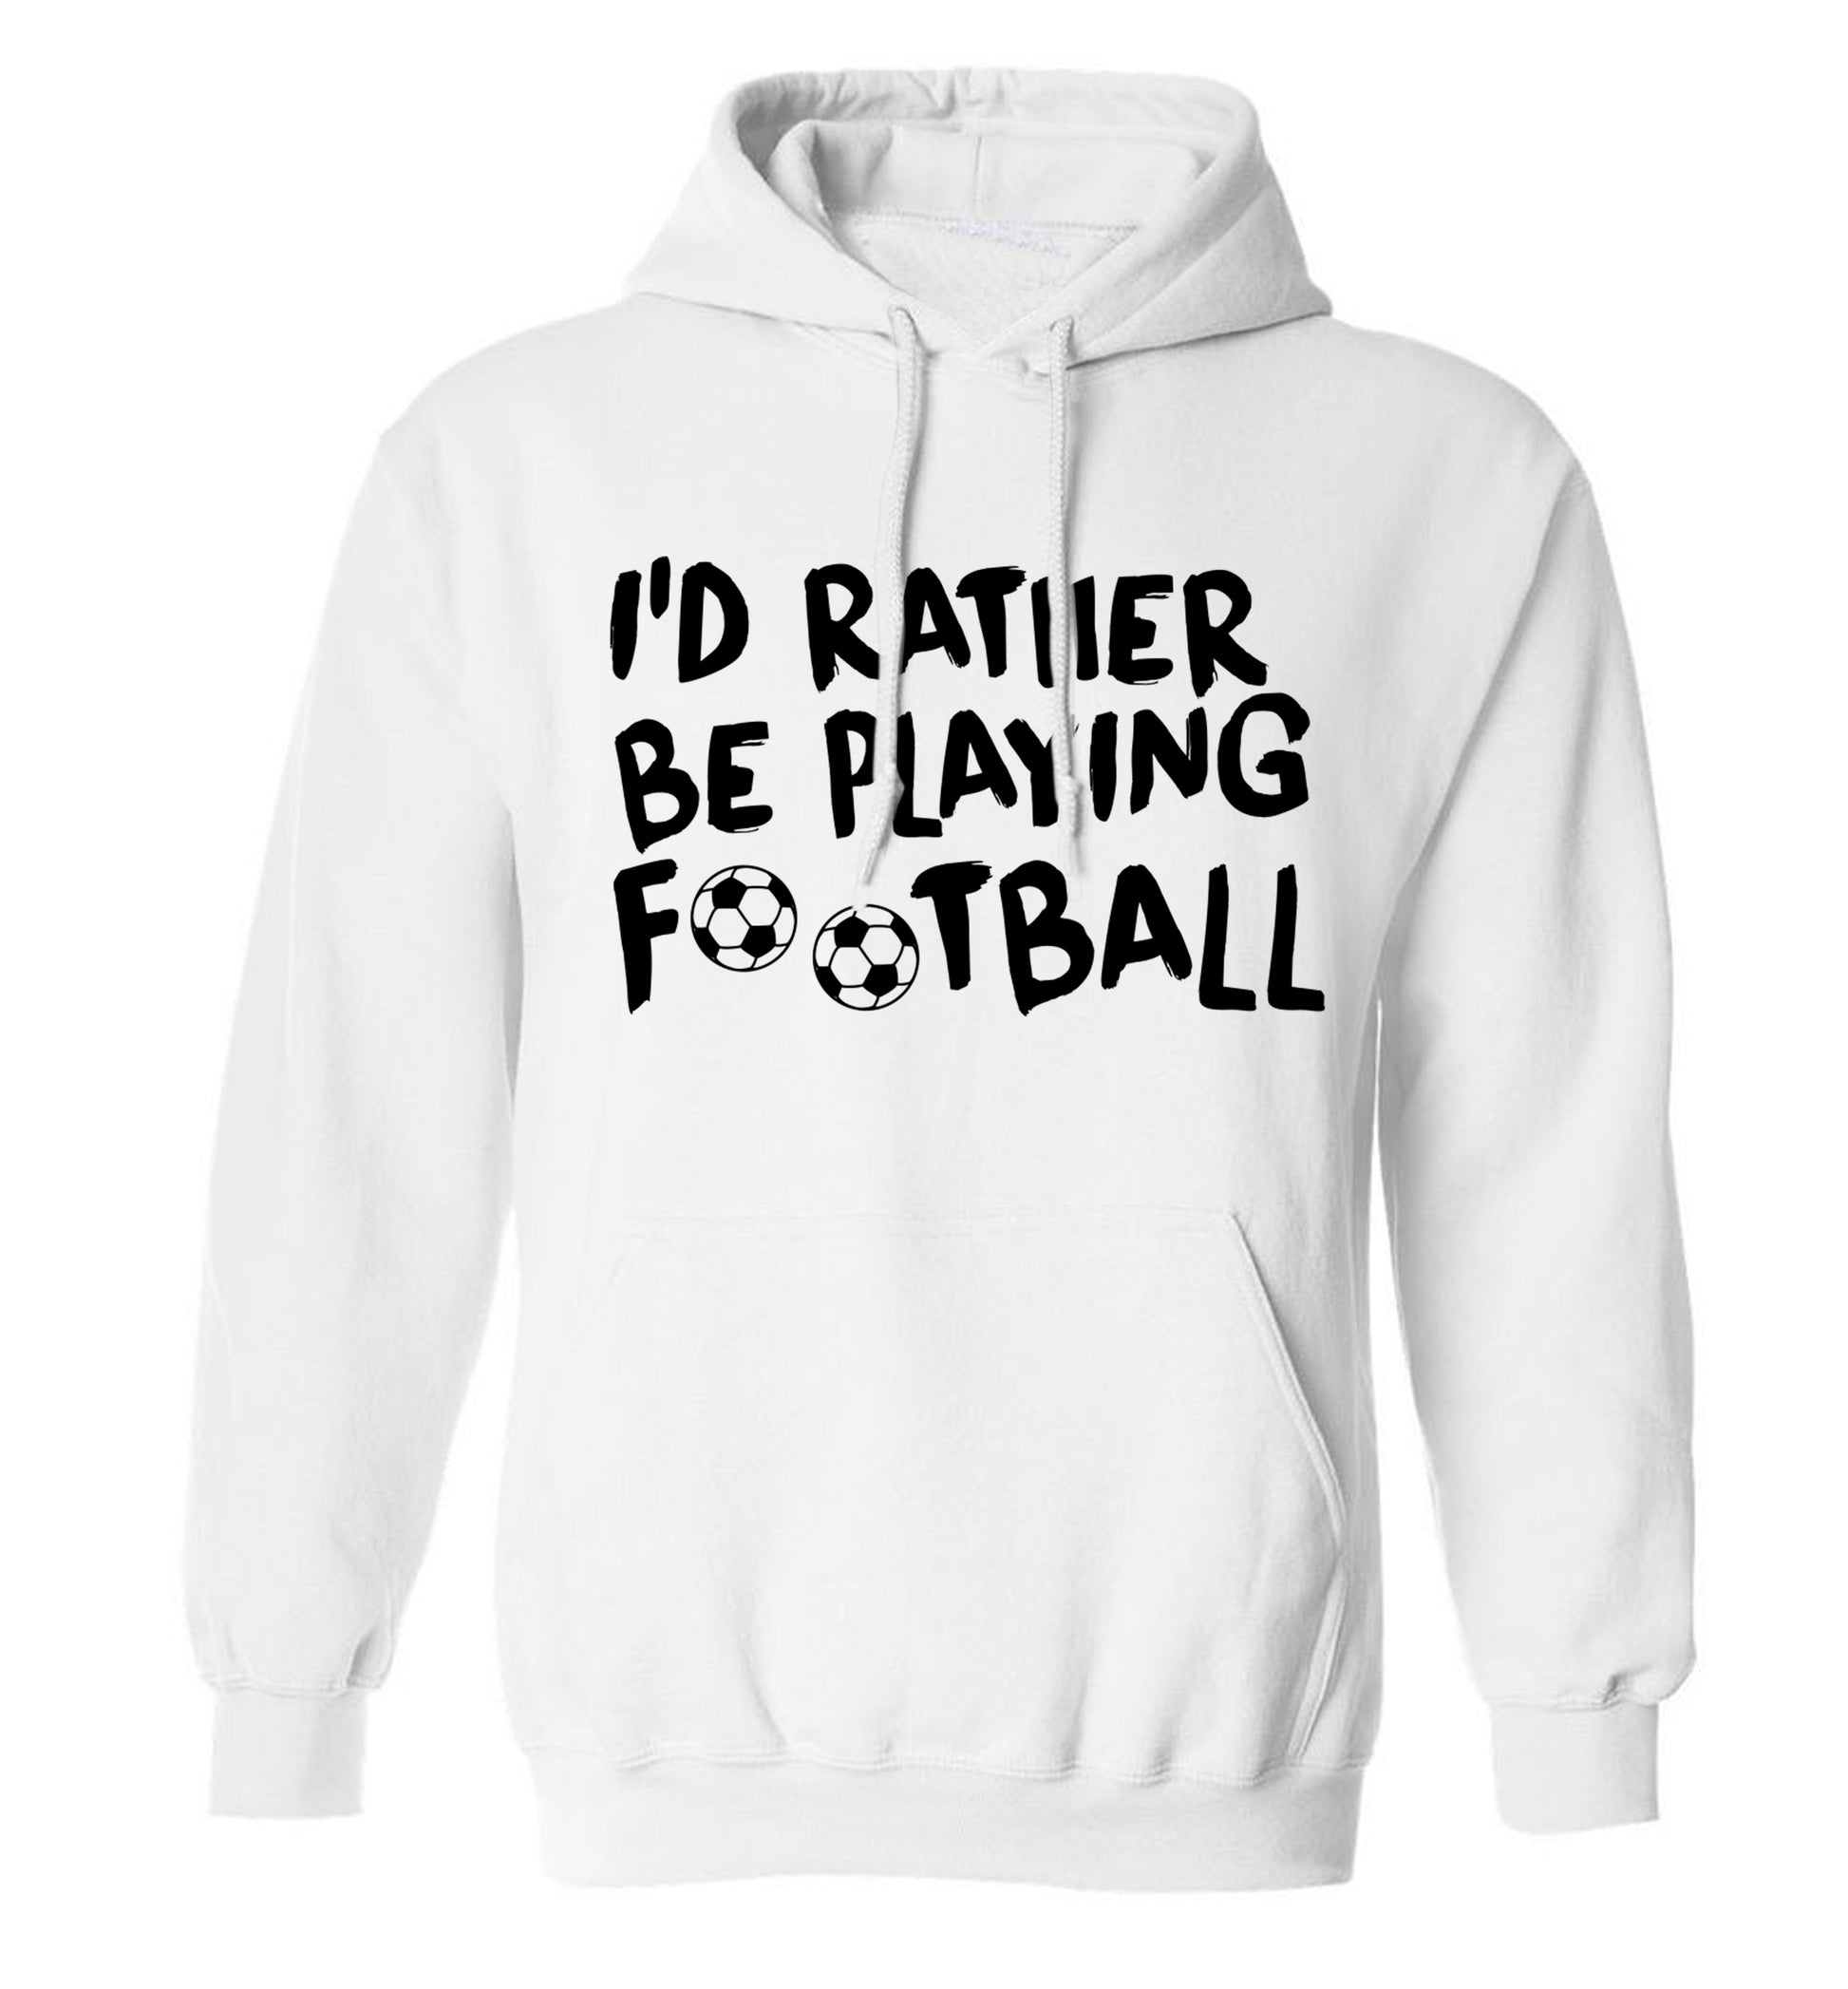 I'd rather be playing football adults unisexwhite hoodie 2XL